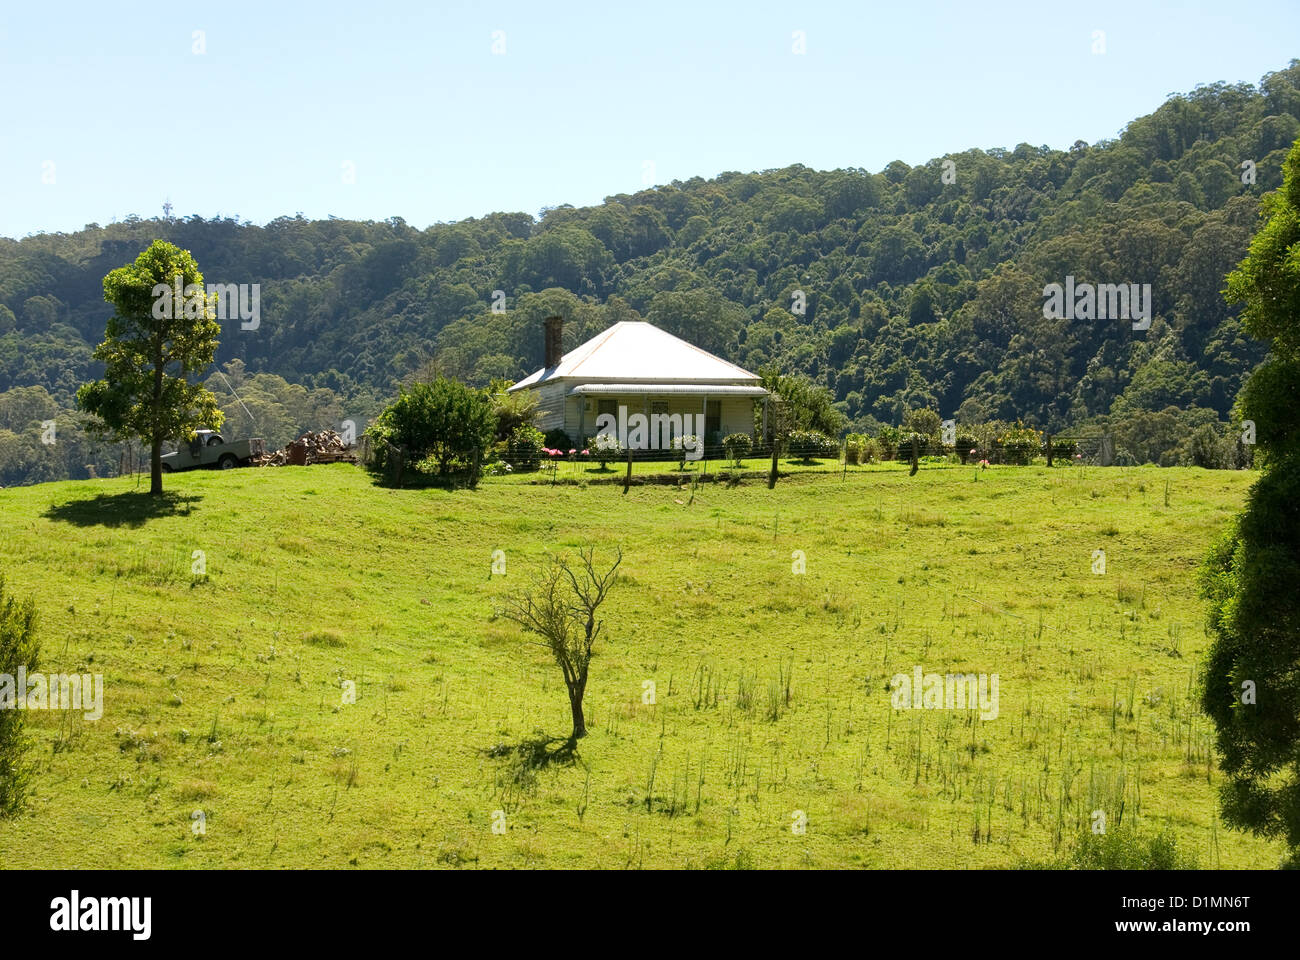 A small house on a farm in Eastern New South Wales, Australia Stock Photo